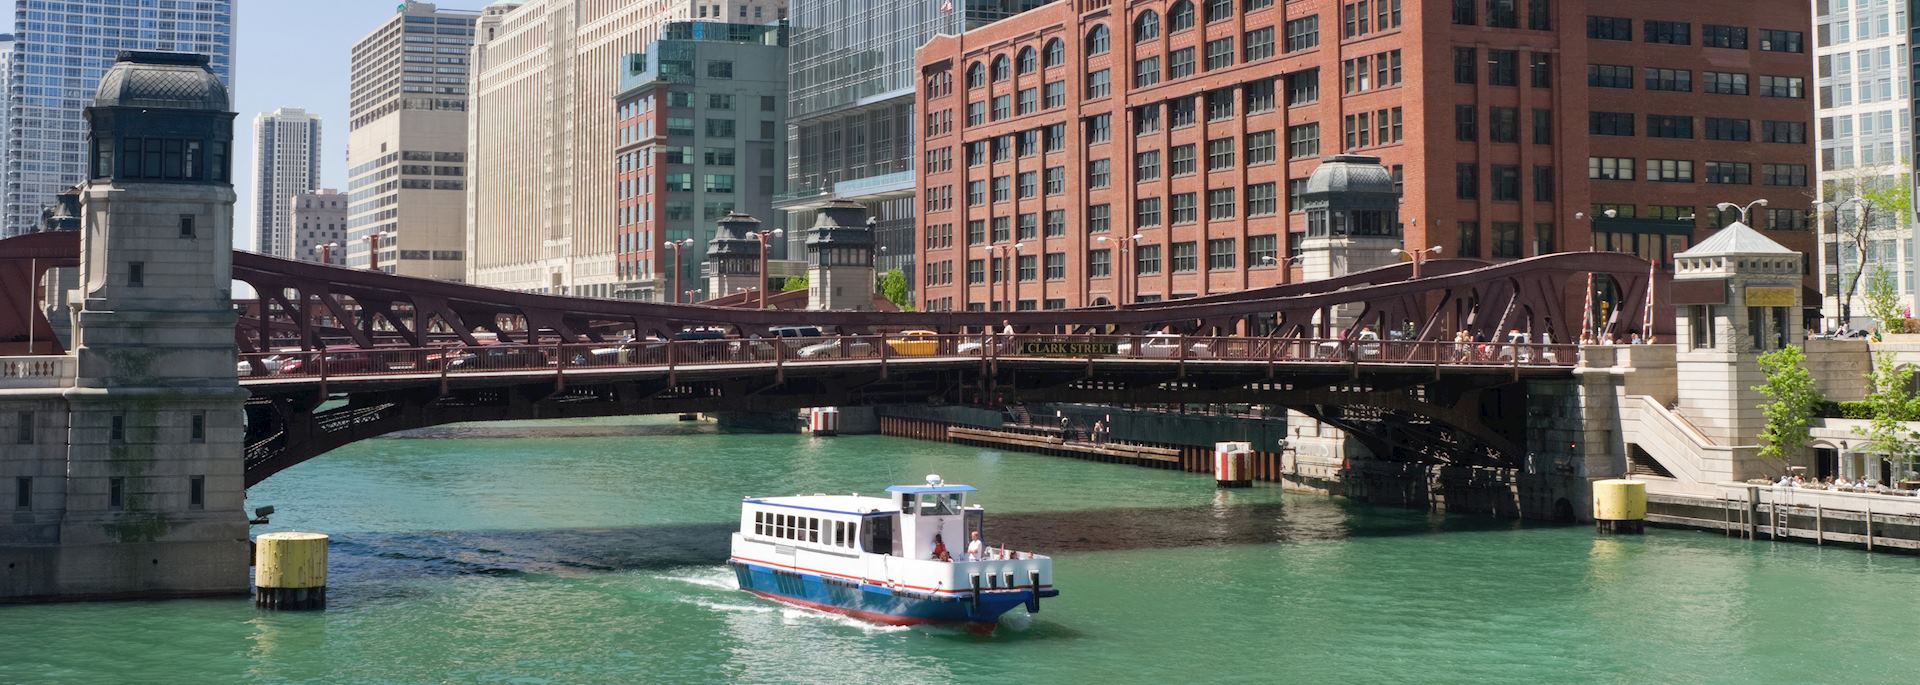 Cruising on the Chicago River